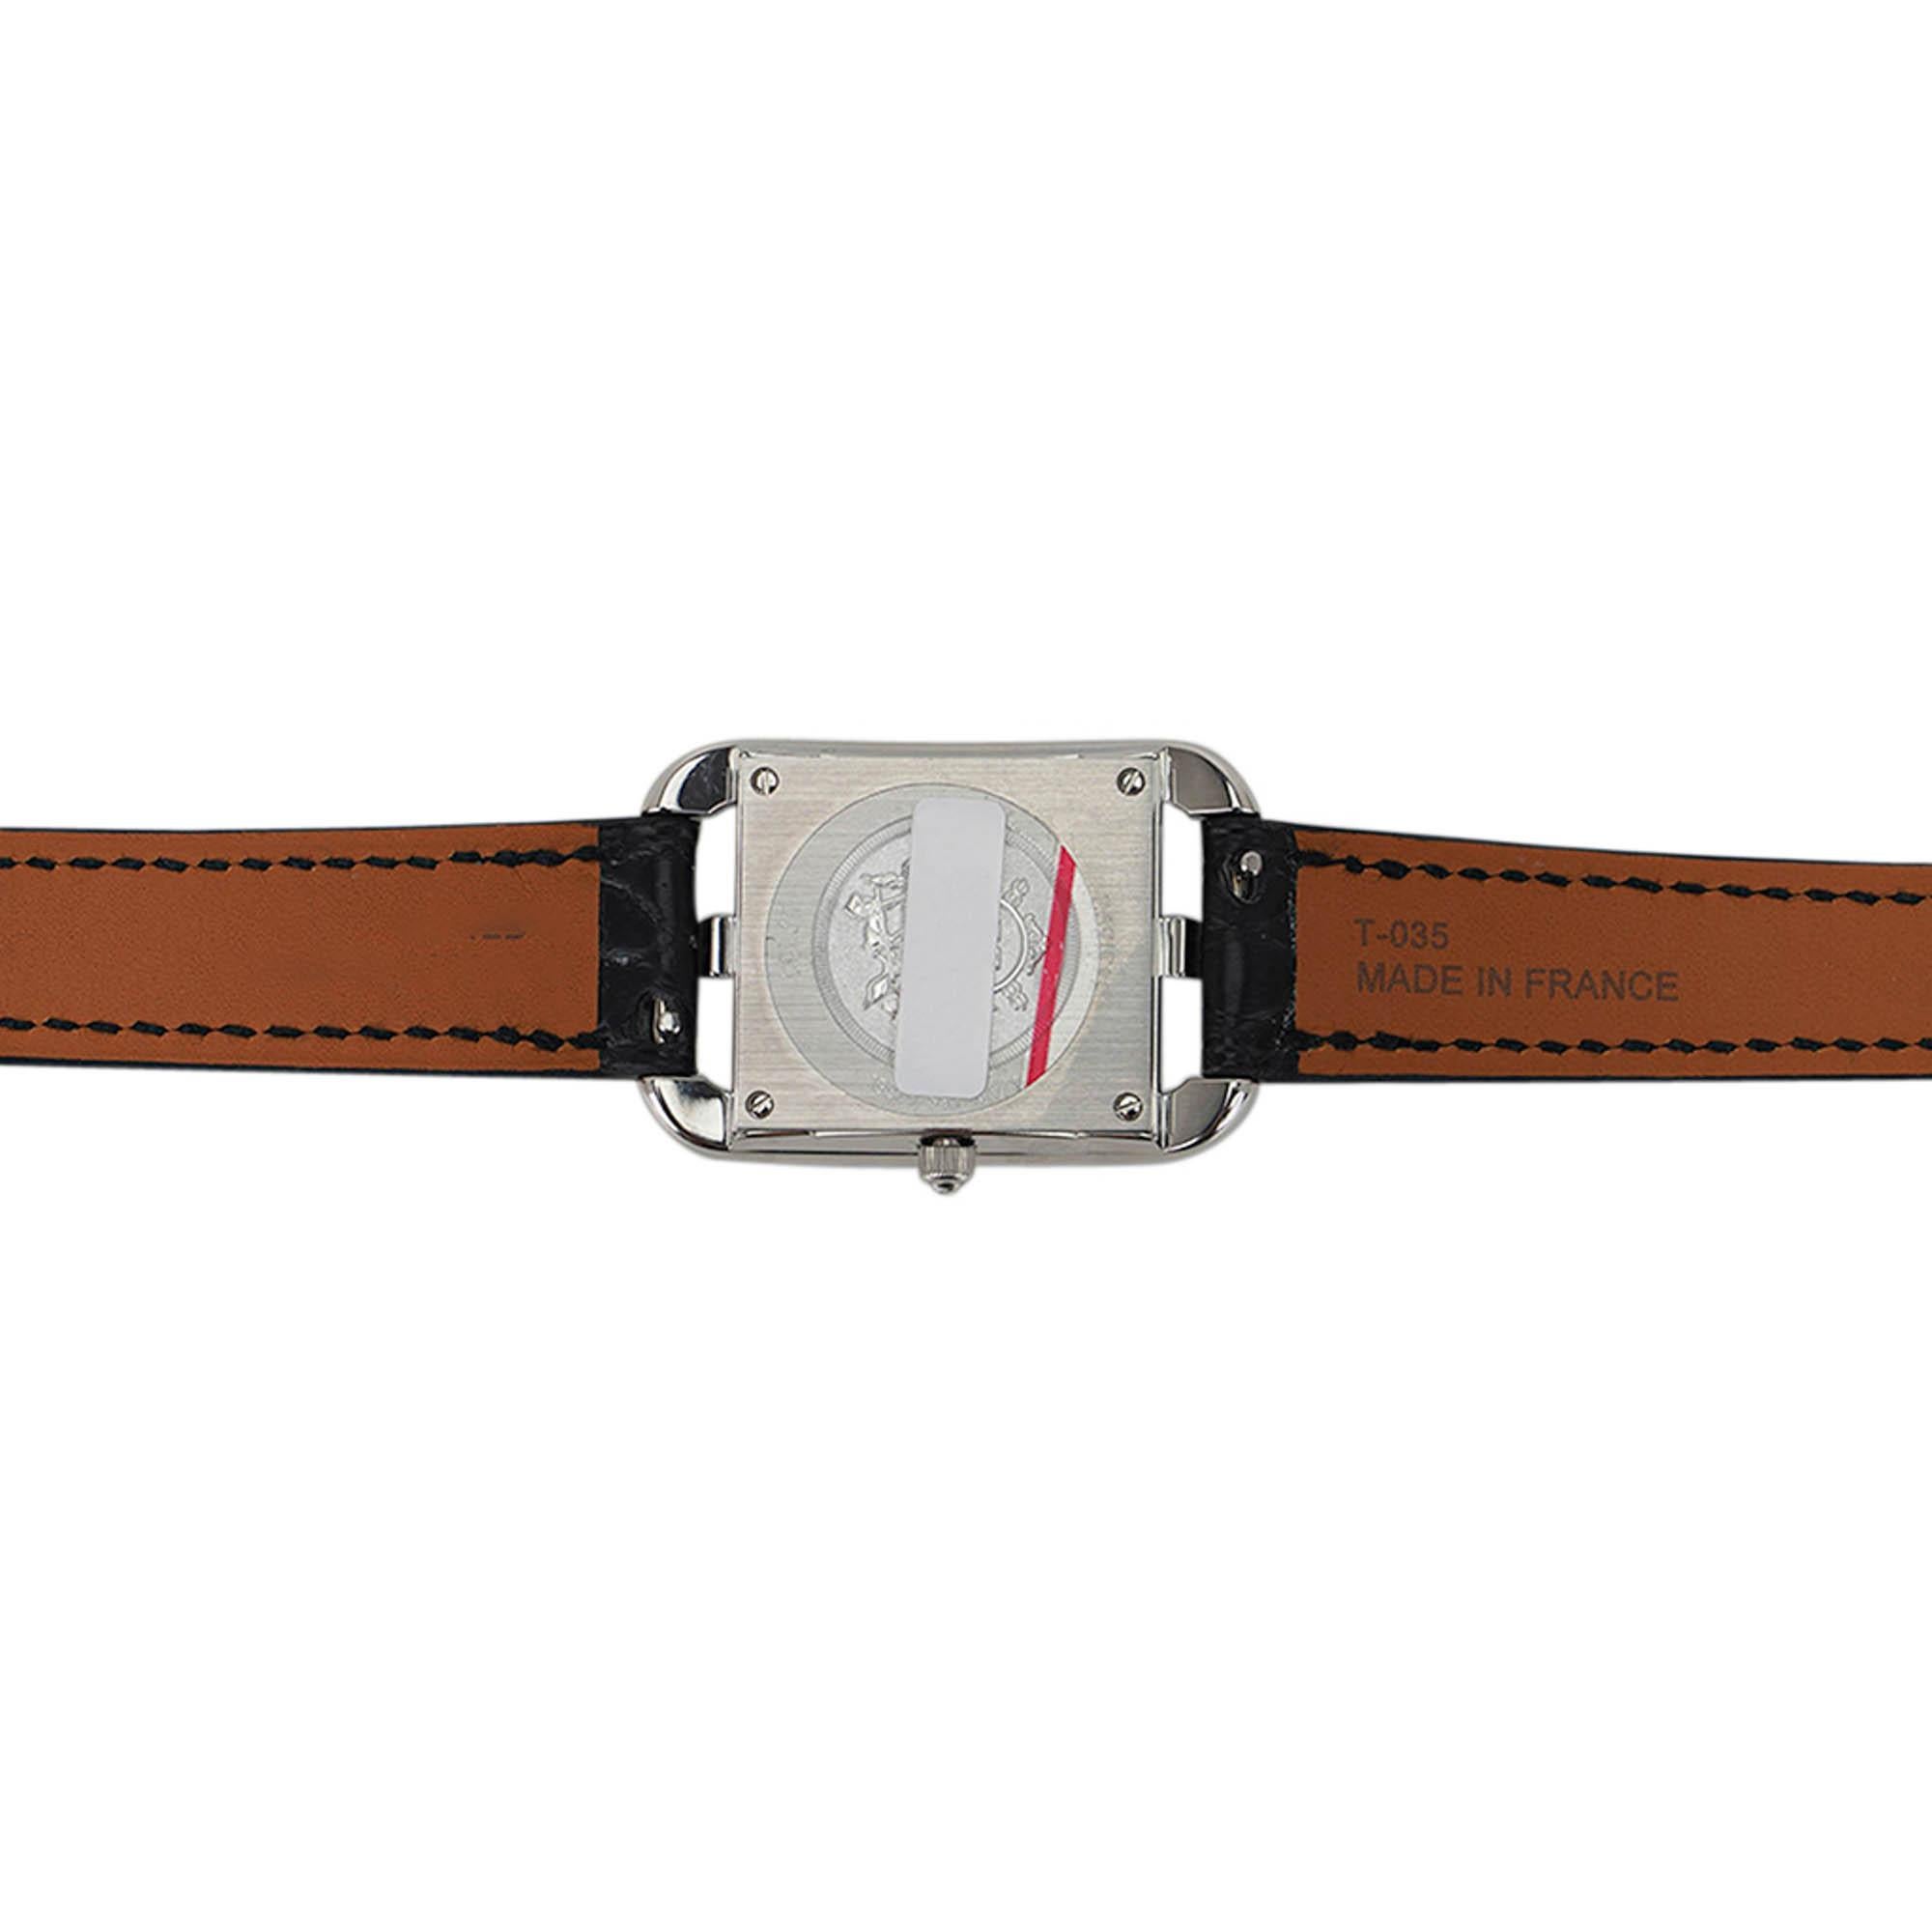 Hermes Cape Cod Hammered Stainless Steel Limited Edtion  Watch For Sale 4